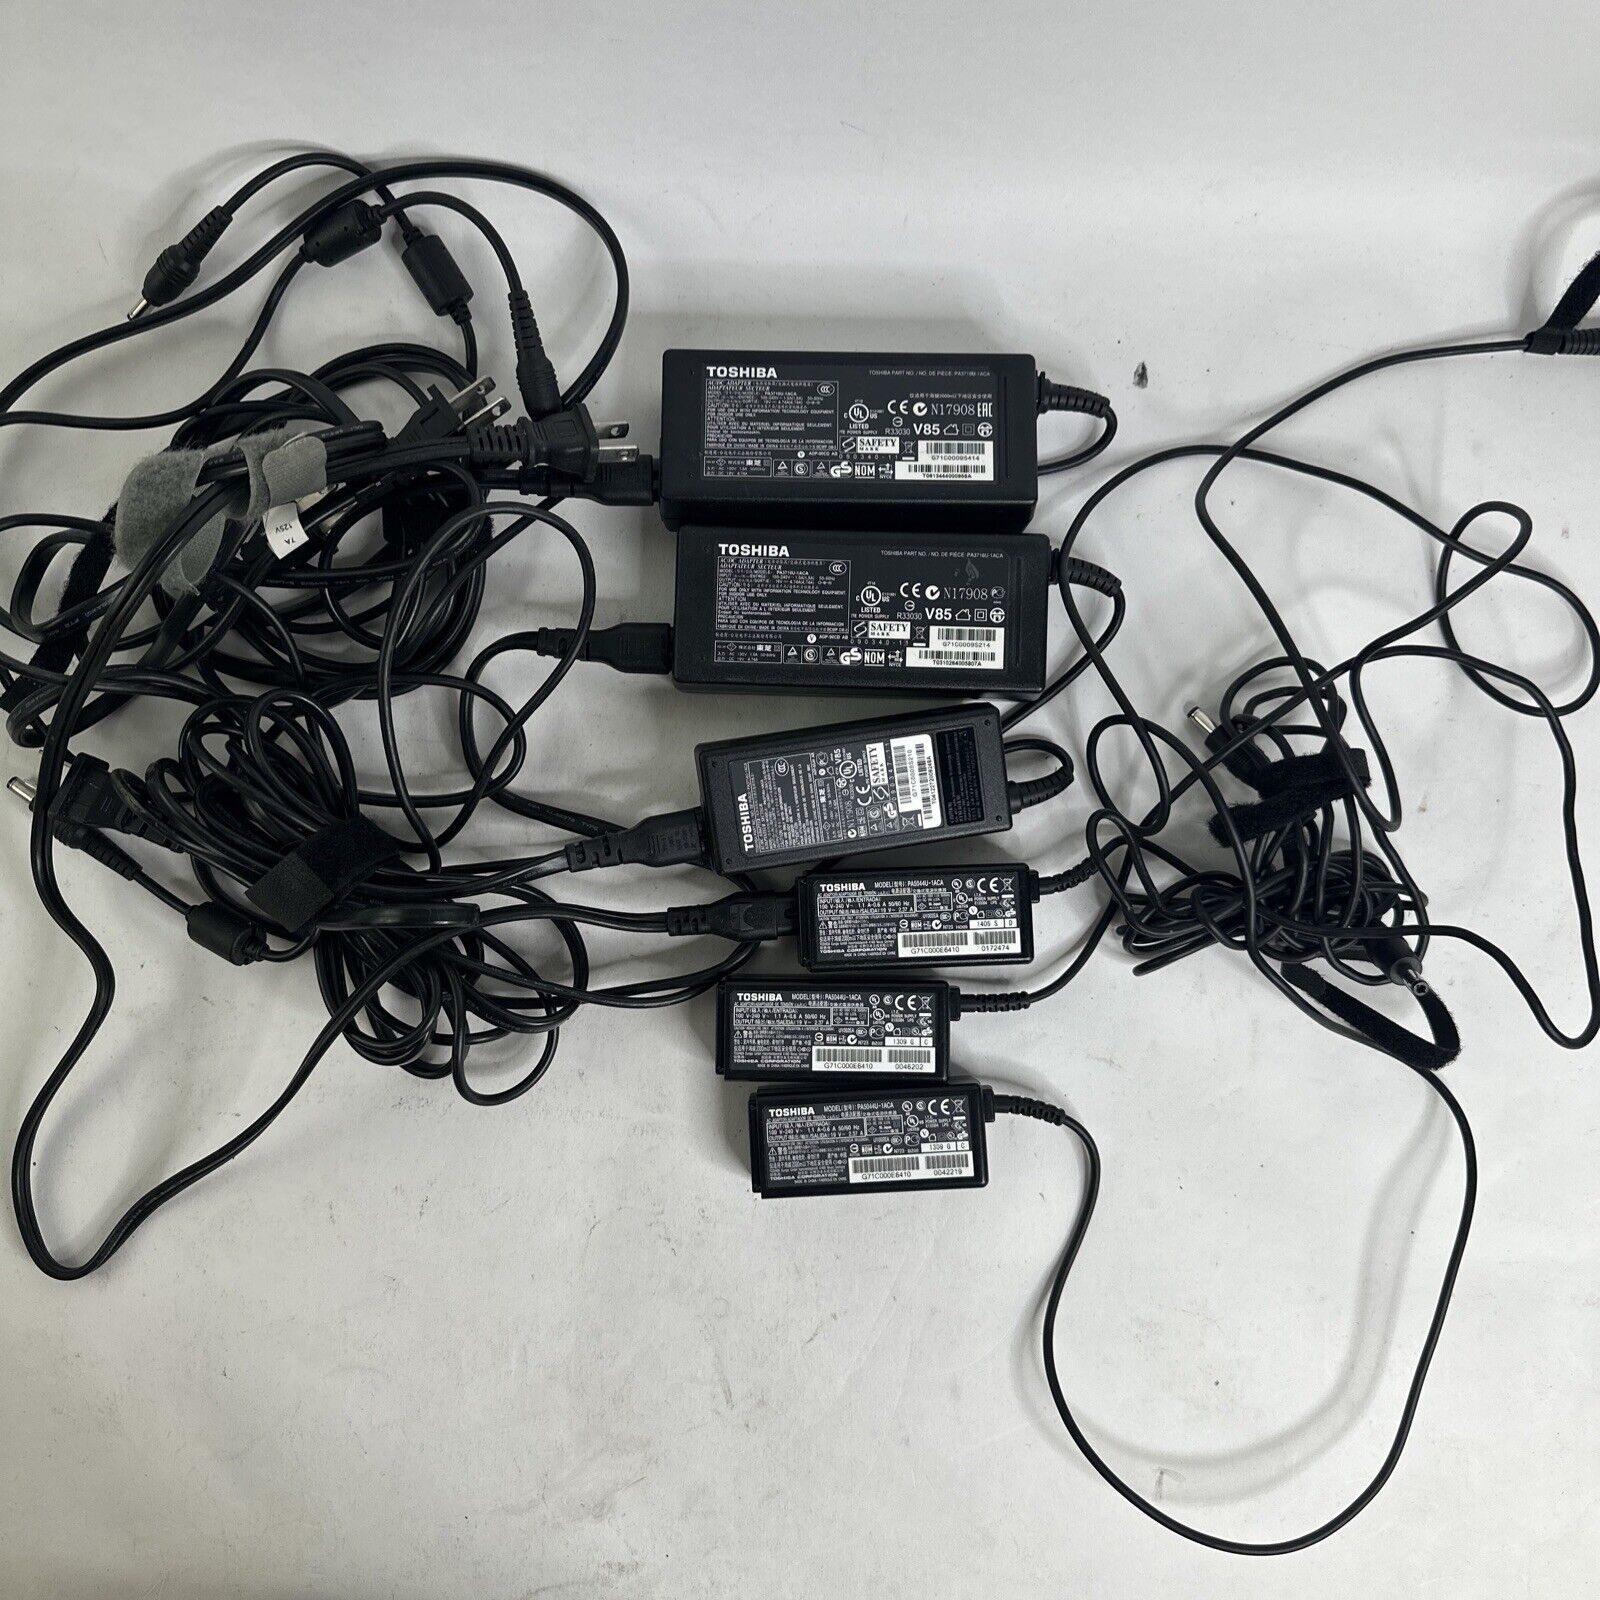 6 x Genuine Toshiba Laptop Chargers AC Power Adapters See Pics For Part Models